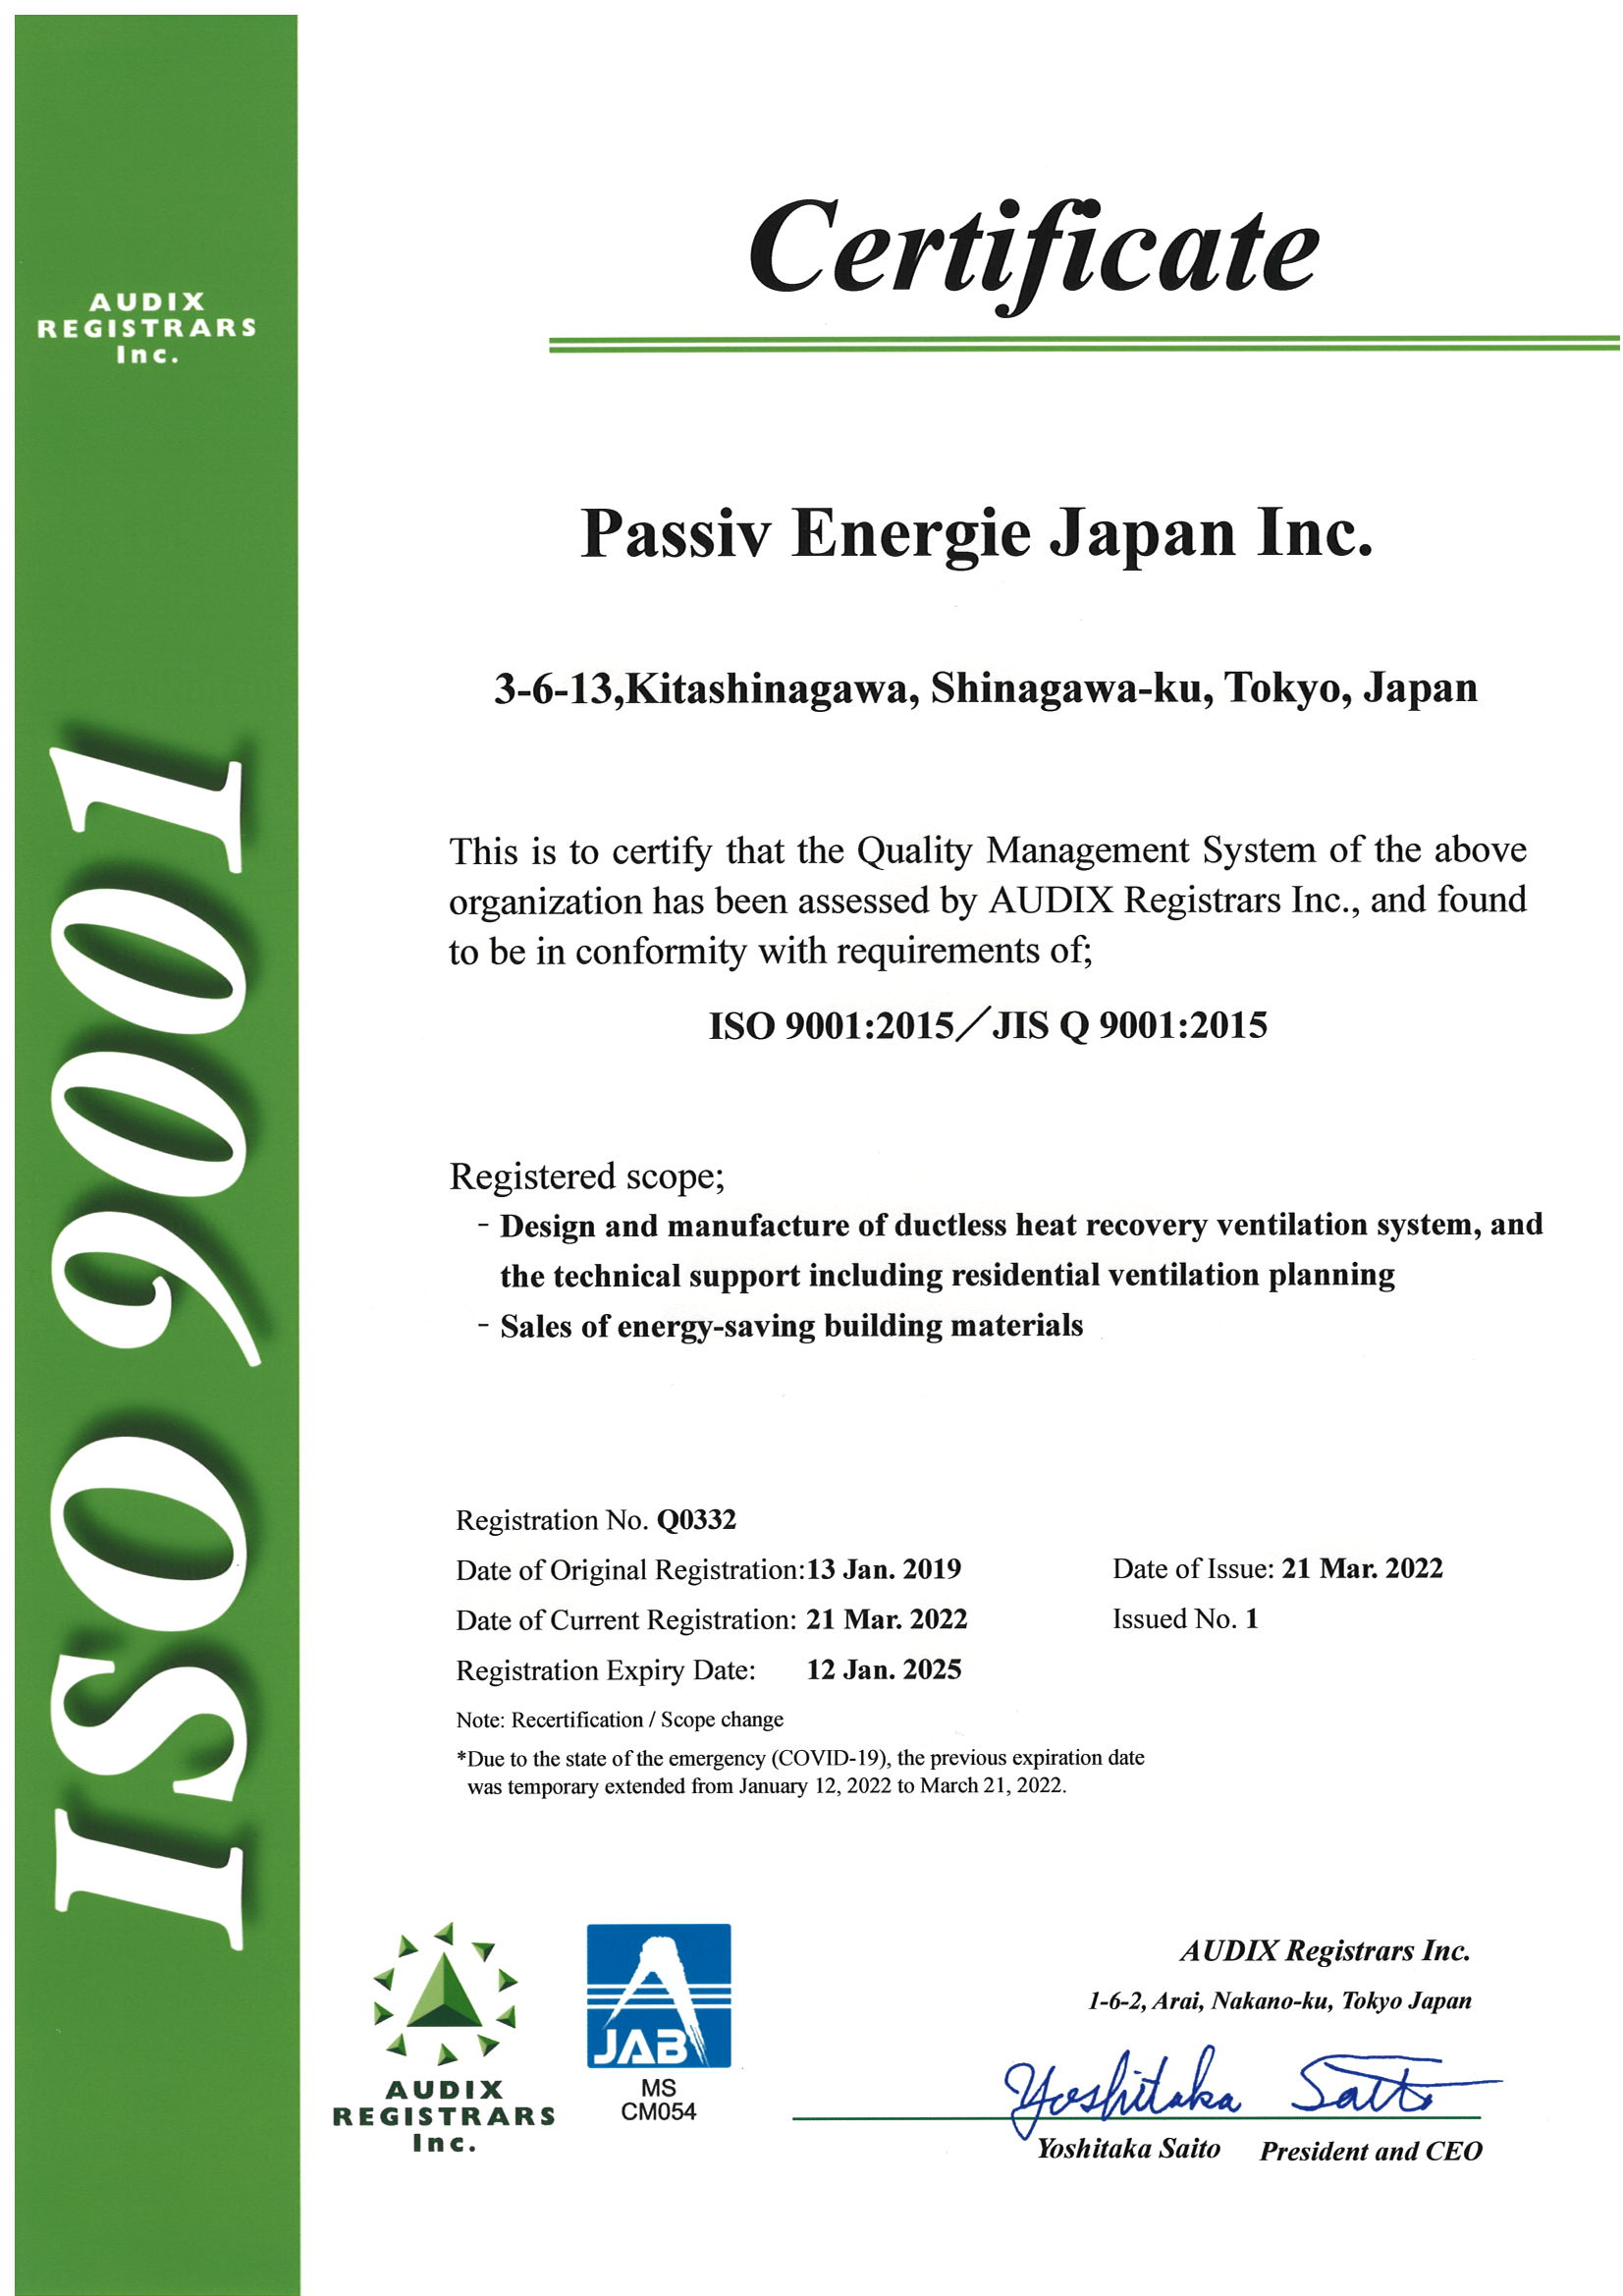 ISO9001 certificate (English).